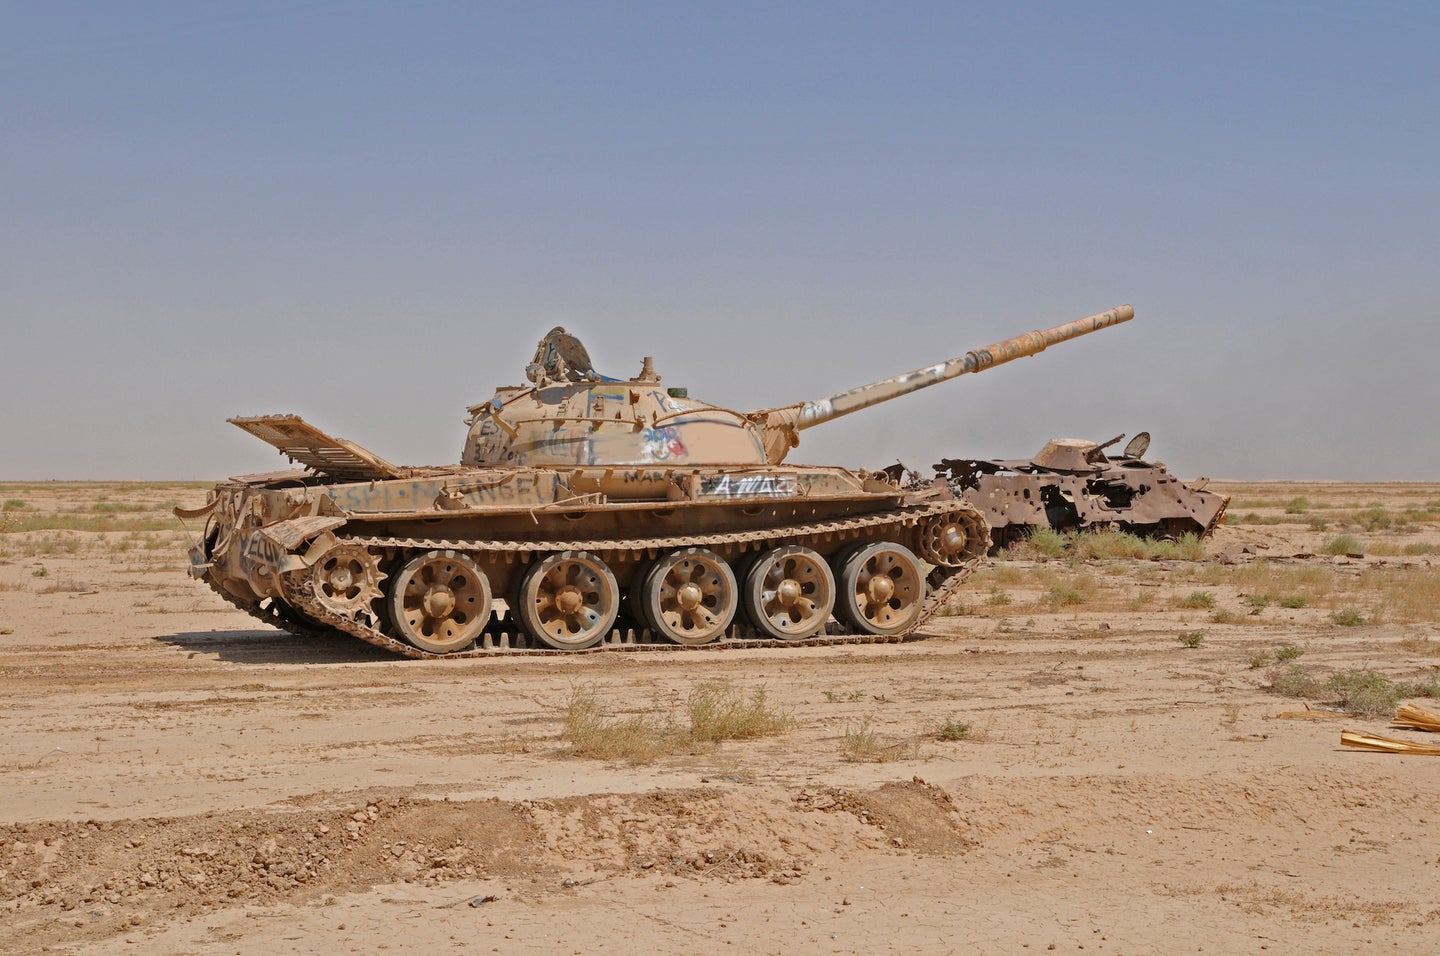 A tank in Iraq in 2011 used for target practice.